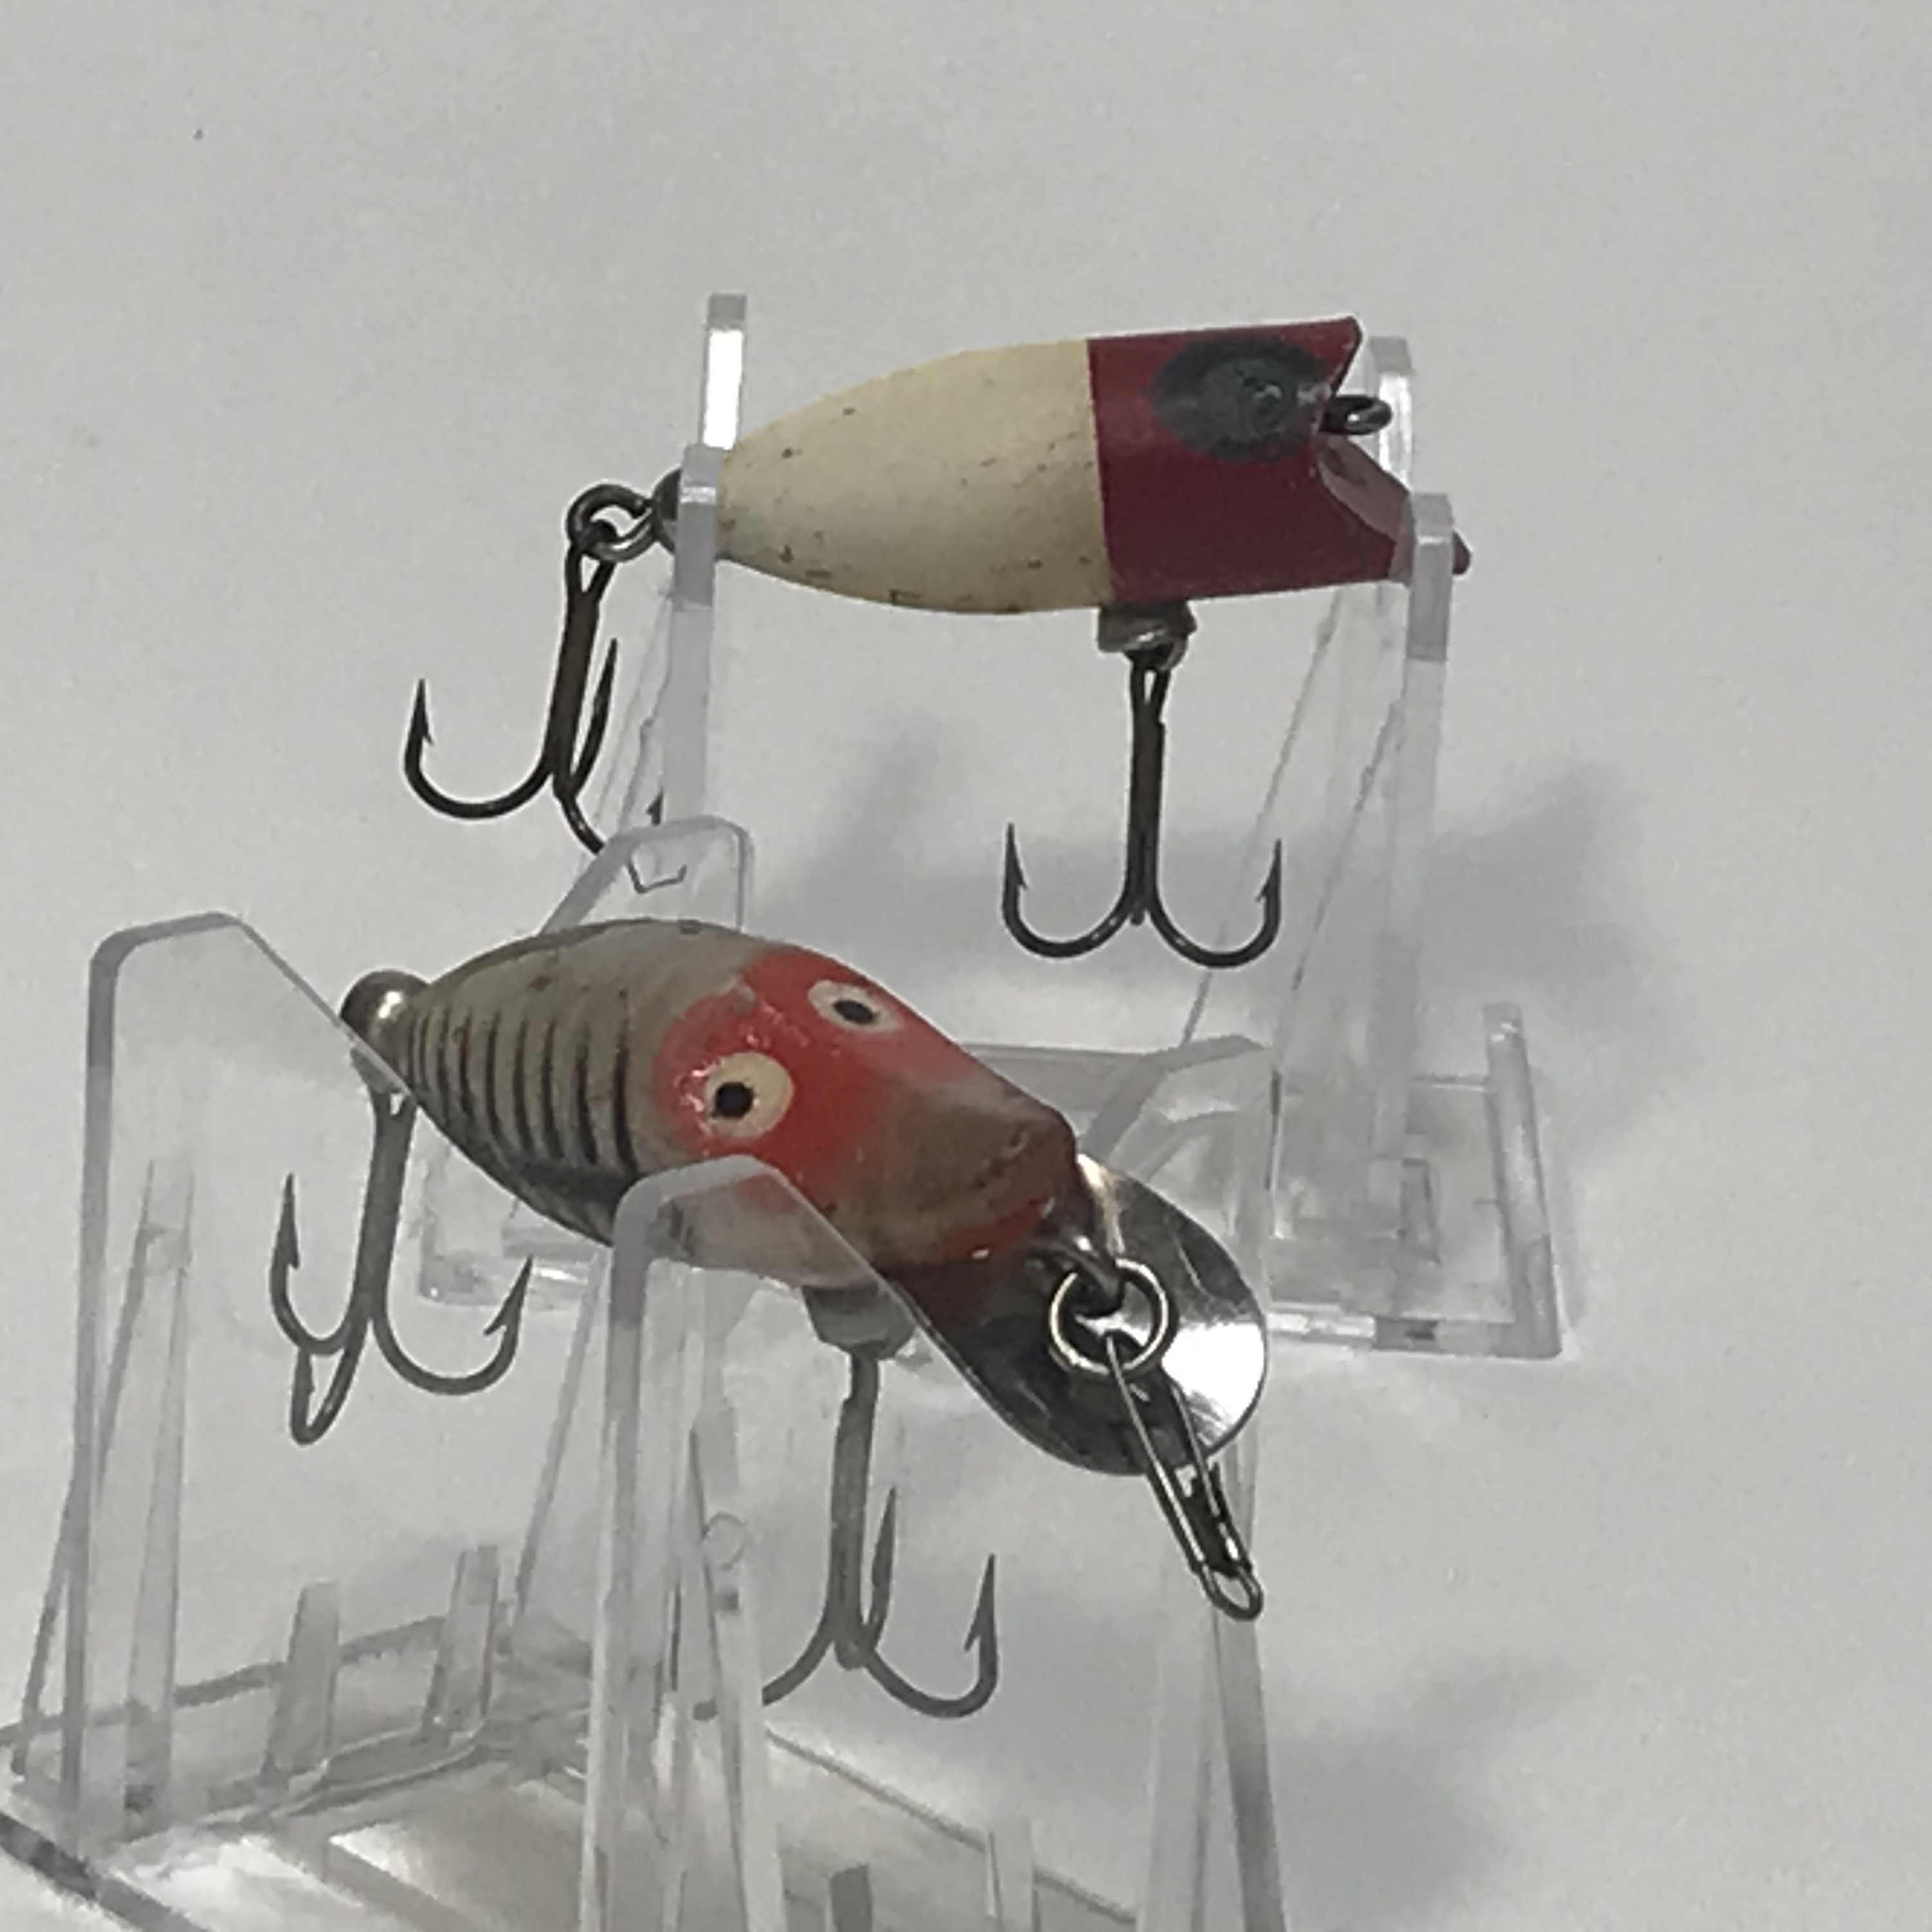 Heddon Tiny Runt Lucky 13 Antique / Vintage Fishing Lure, Tackle, Gear, Fish  Crankbait Minnow Plastic Topwater Bait, Angler Classic Fishhook 